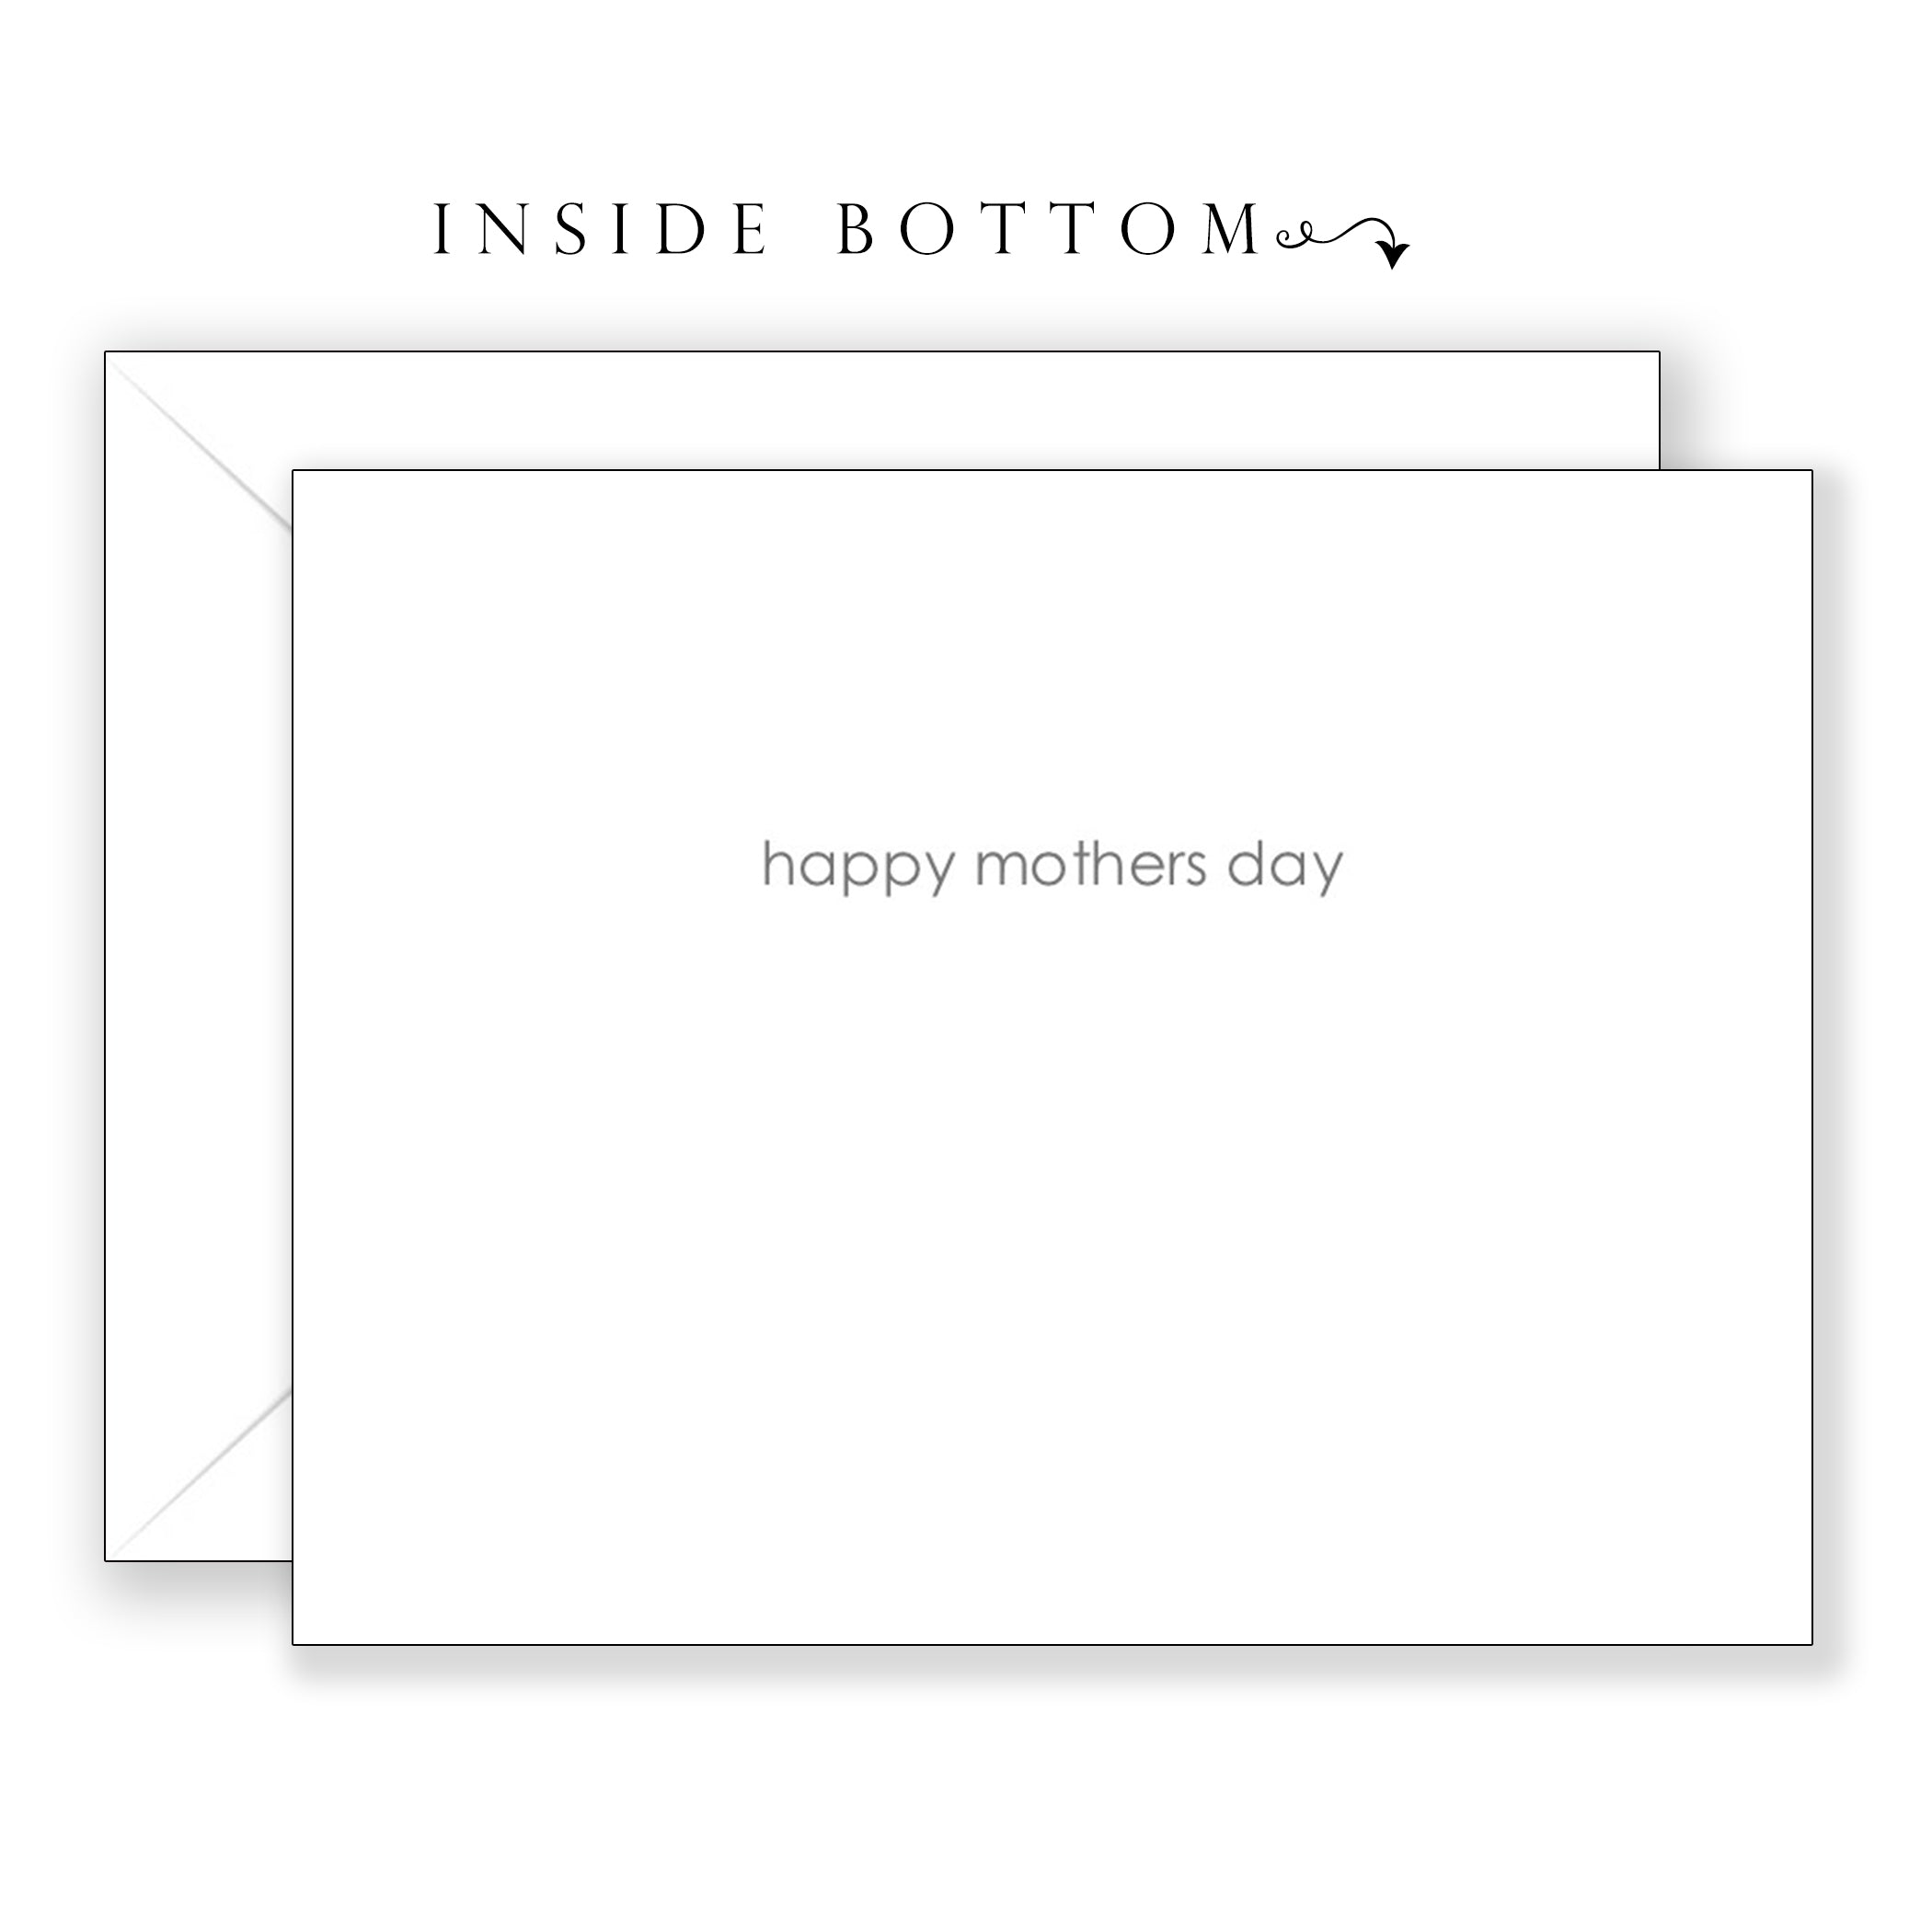 Teacup Heaven - Mother's Day Card